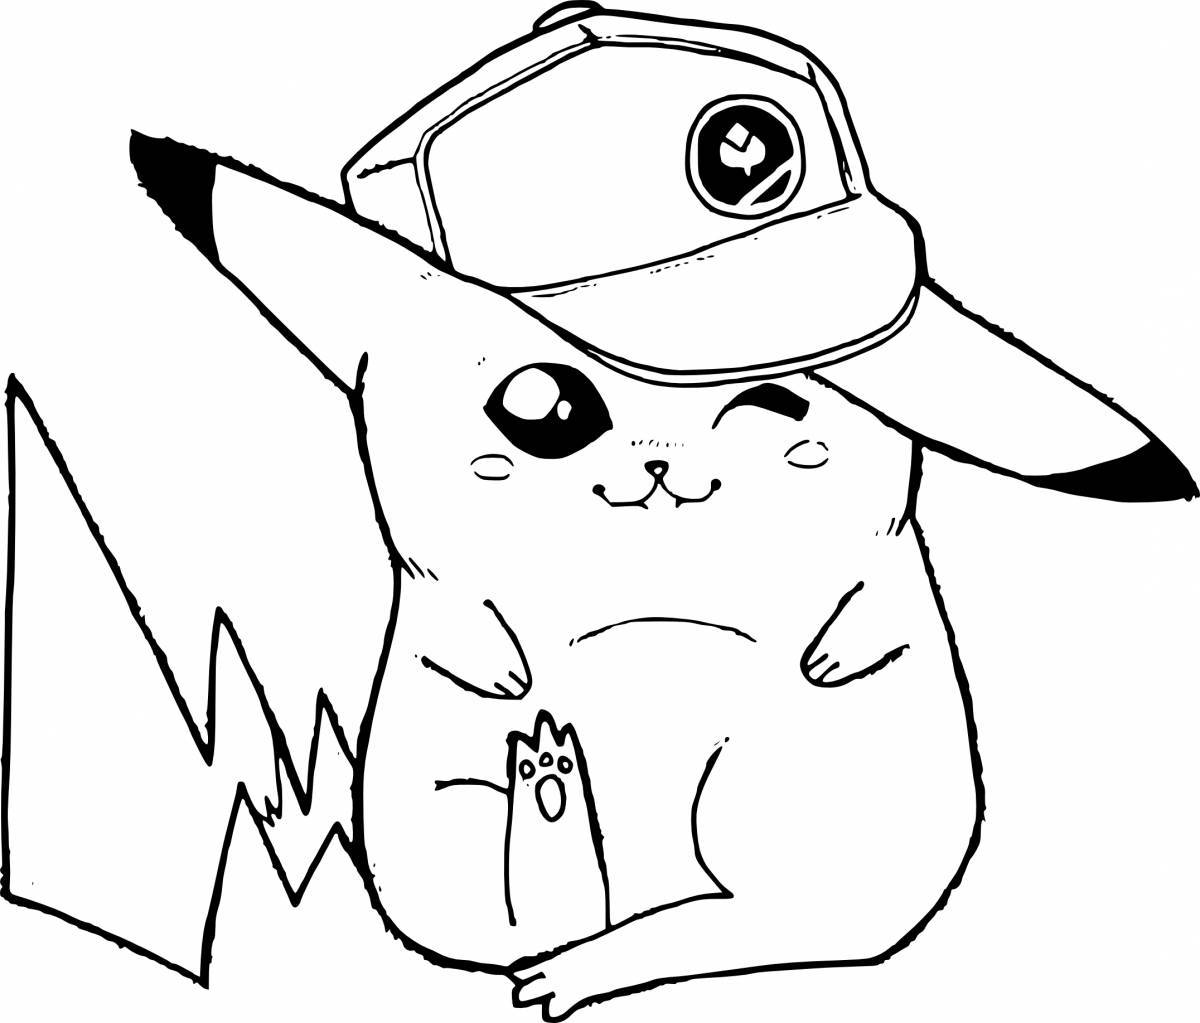 Great pikachu coloring book for kids